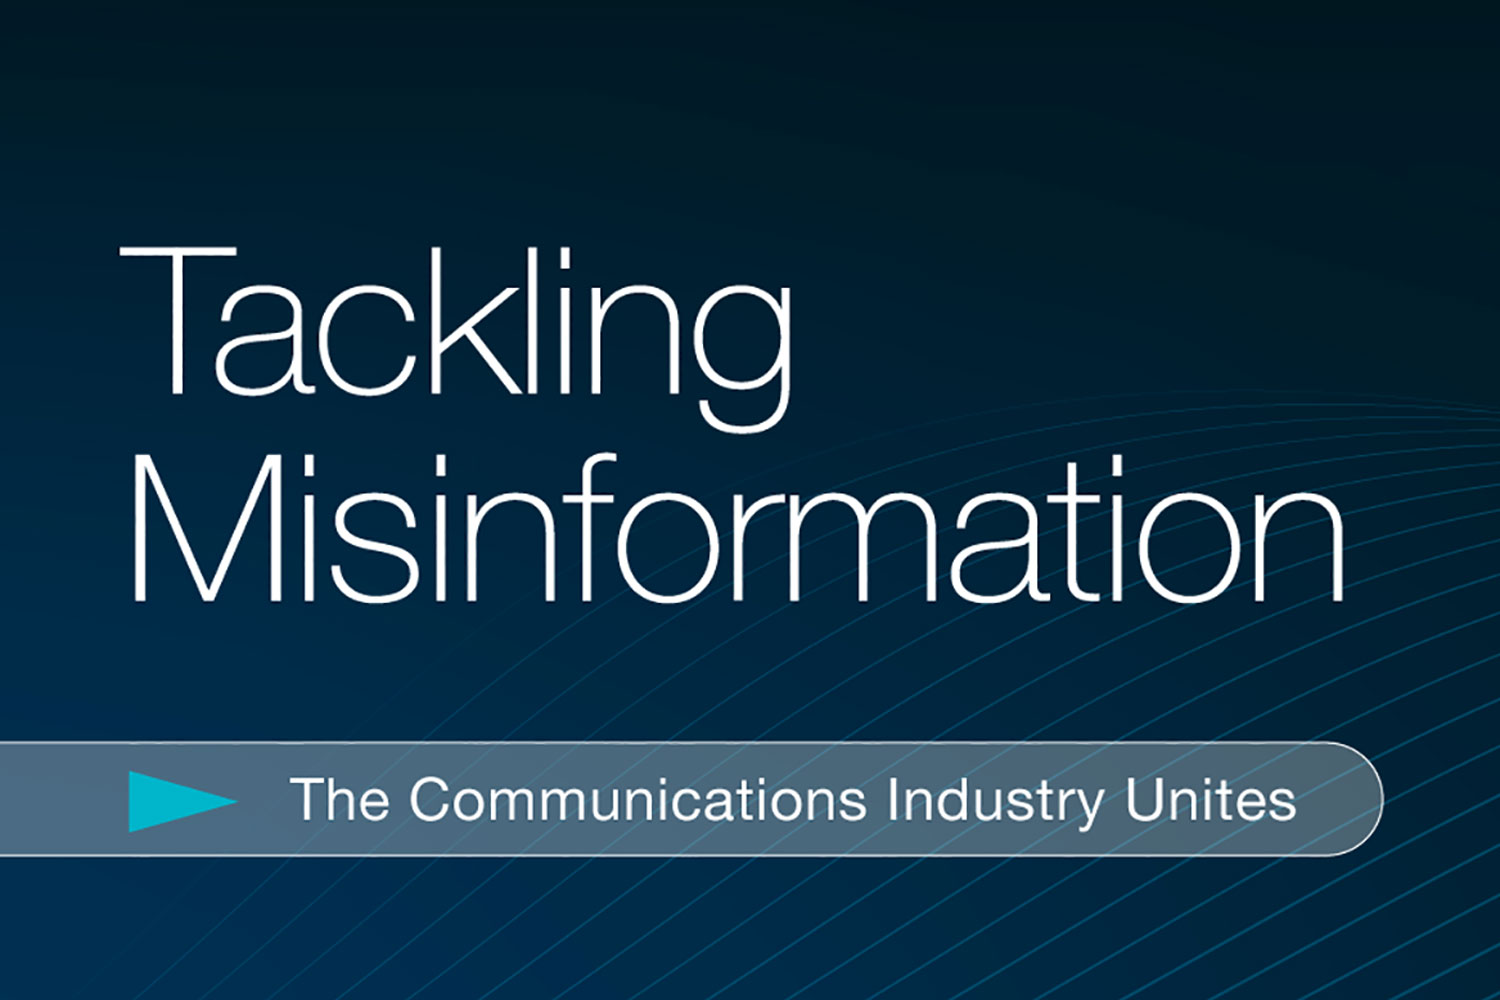 Tackling Disinformation: The Communications Industry Unites